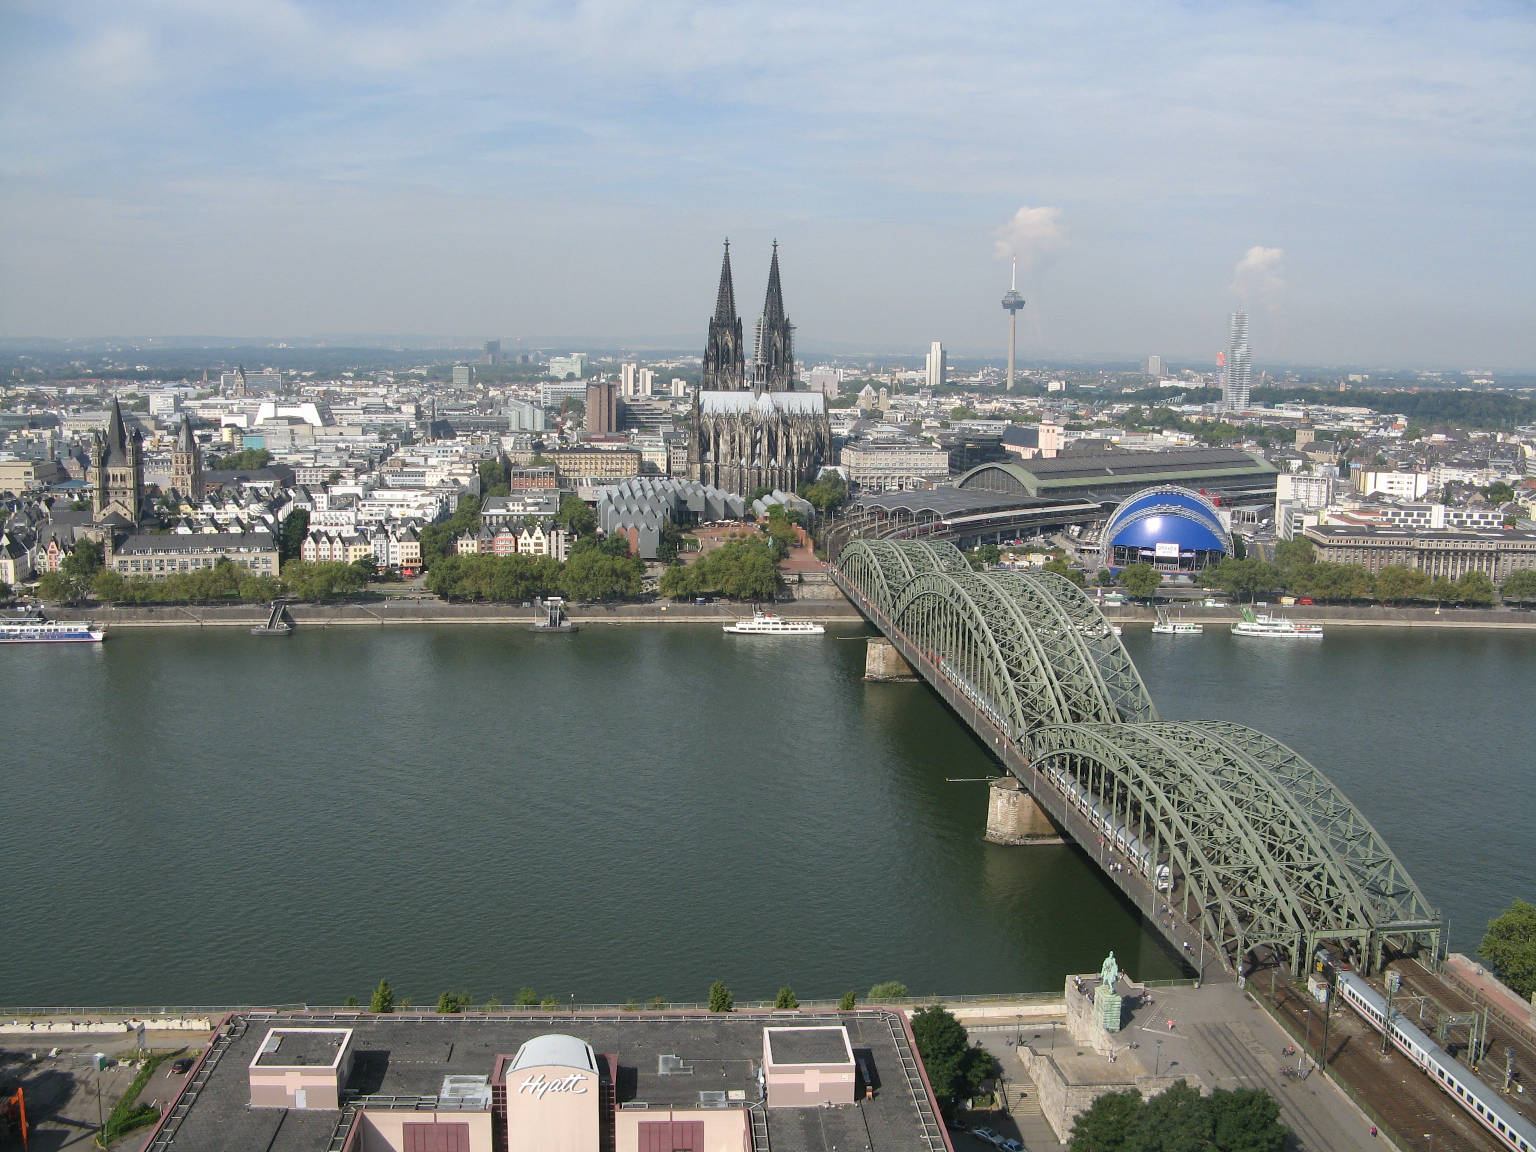 Cologne from the tower